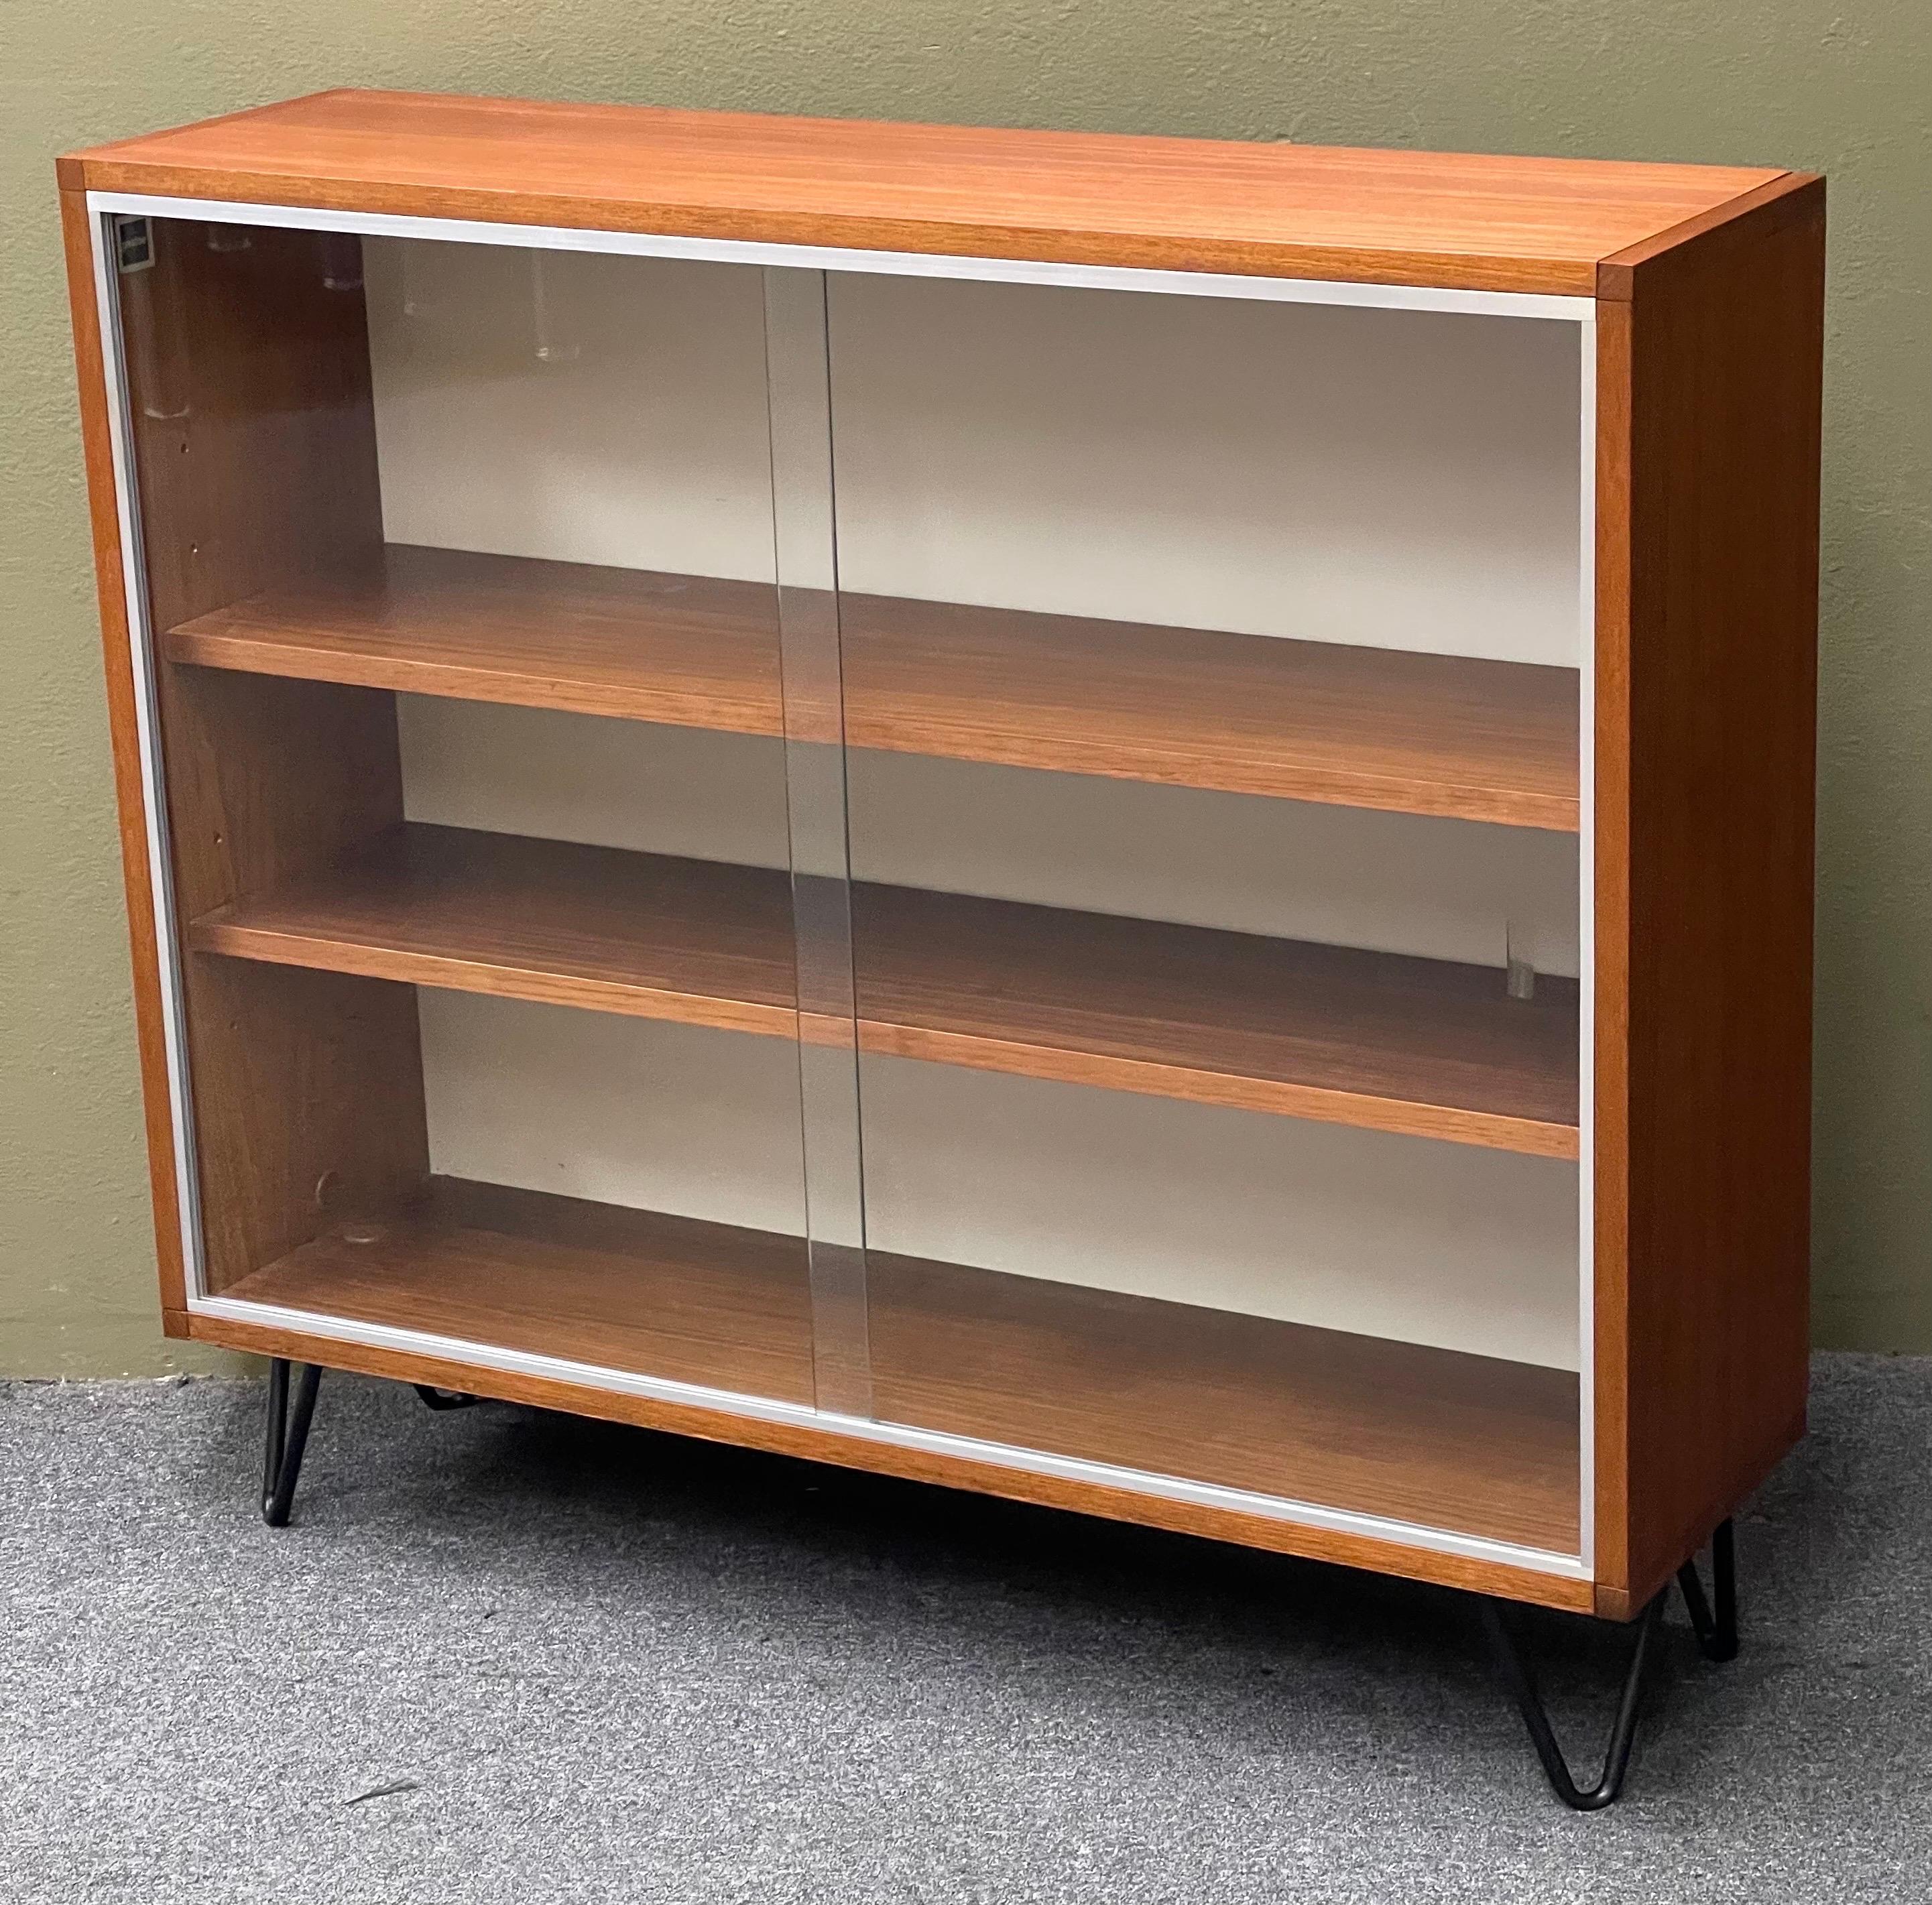 Elegant Danish Modern Bookcase / Cabinet with Glass Doors and Hairpin Legs 8